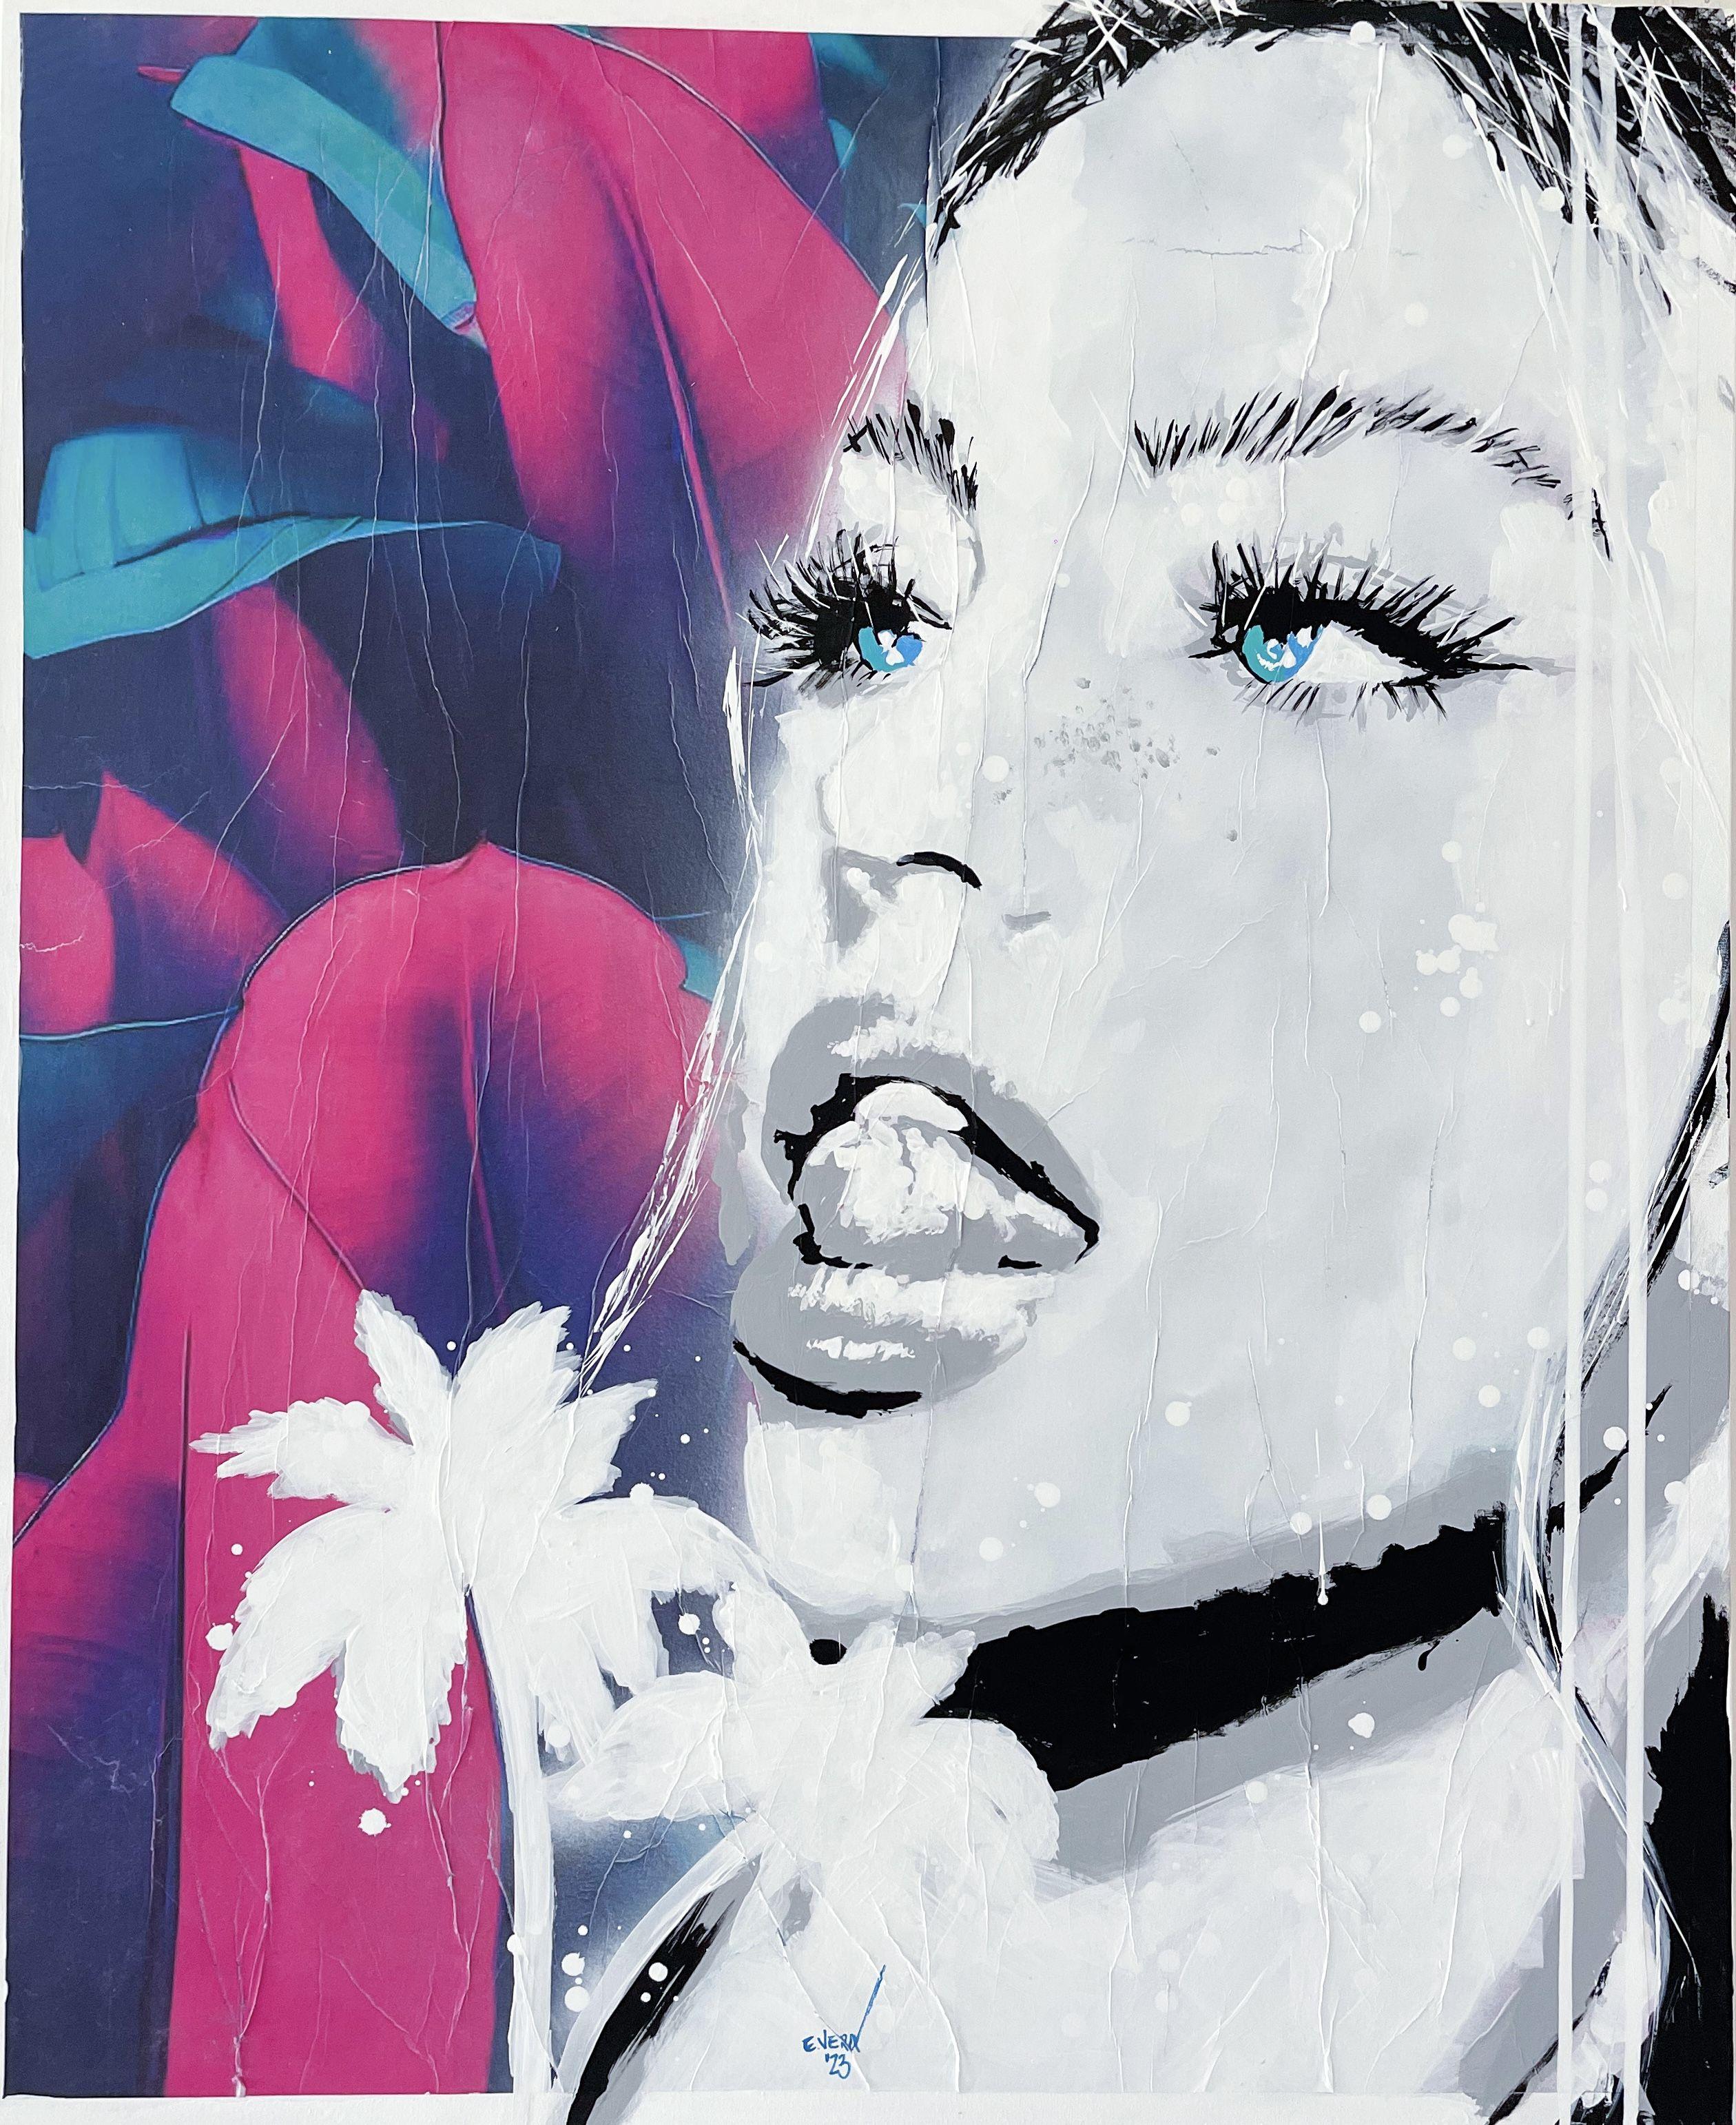 "Natural Essence Series"  The six works of art in this new series by EVera showcase the inner and outer beauty of women through unique and contemporary interpretations. Each piece is created using acrylic and spray paint on canvas, with a background